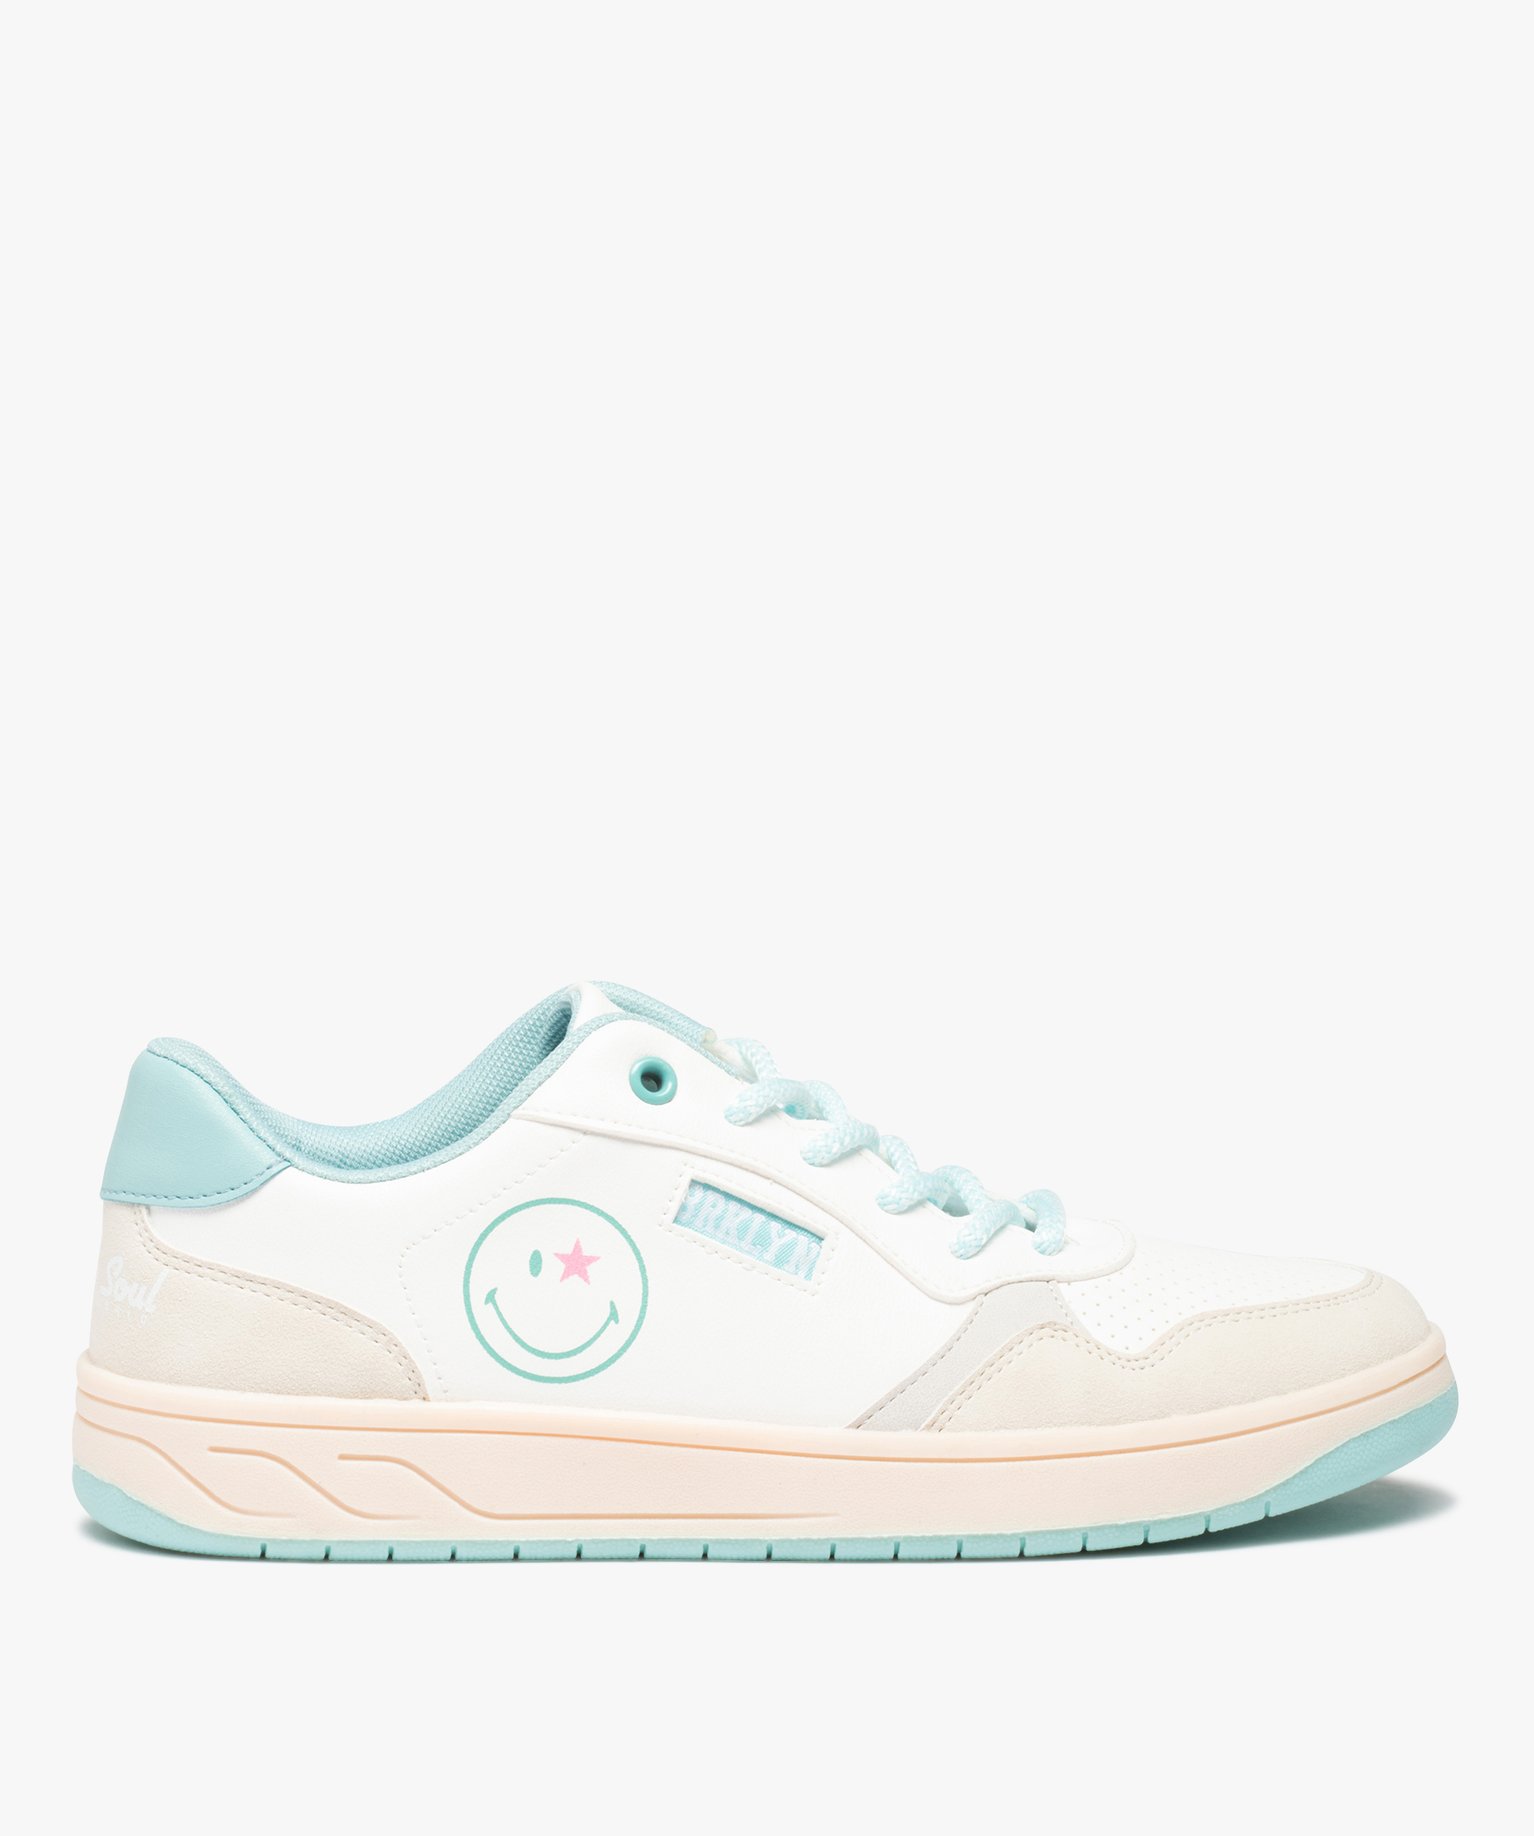 tennis femme style retro a lacets - smiley world blanc